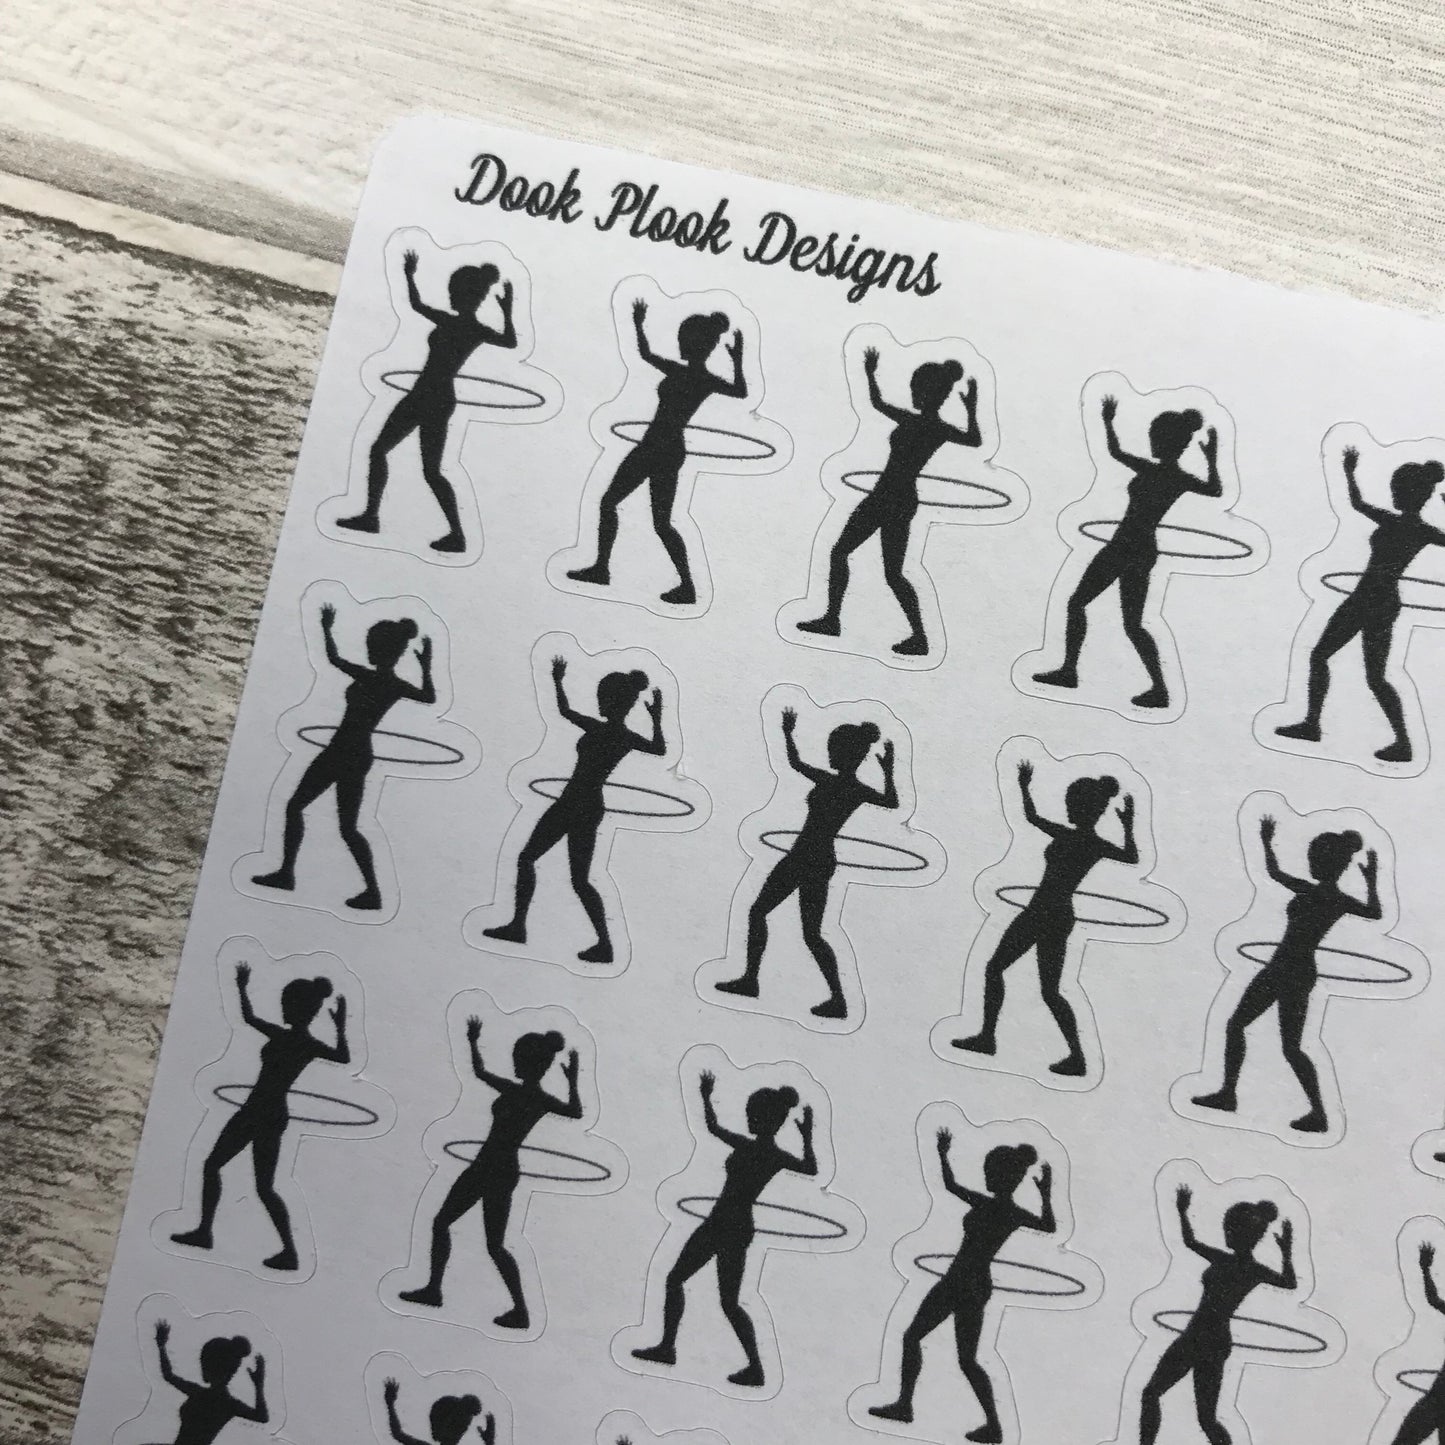 Hula hooping stickers (DPD713)